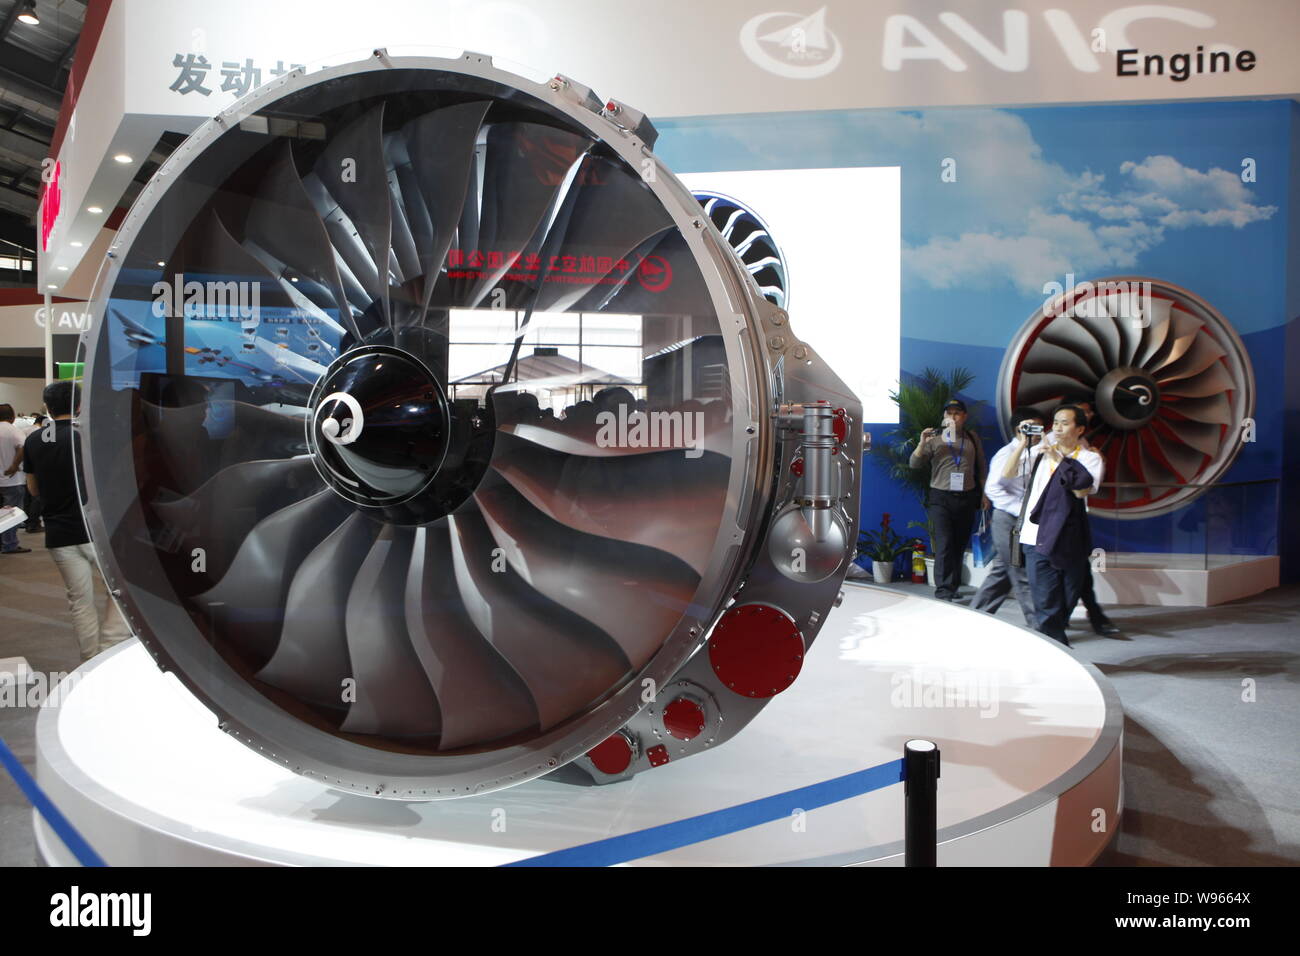 A model of the CJ-1000A high-bypass-ratio turbofan engine is displayed at the stand of AVIC (Aviation Industry Corporation of China) during the 9th Ch Stock Photo